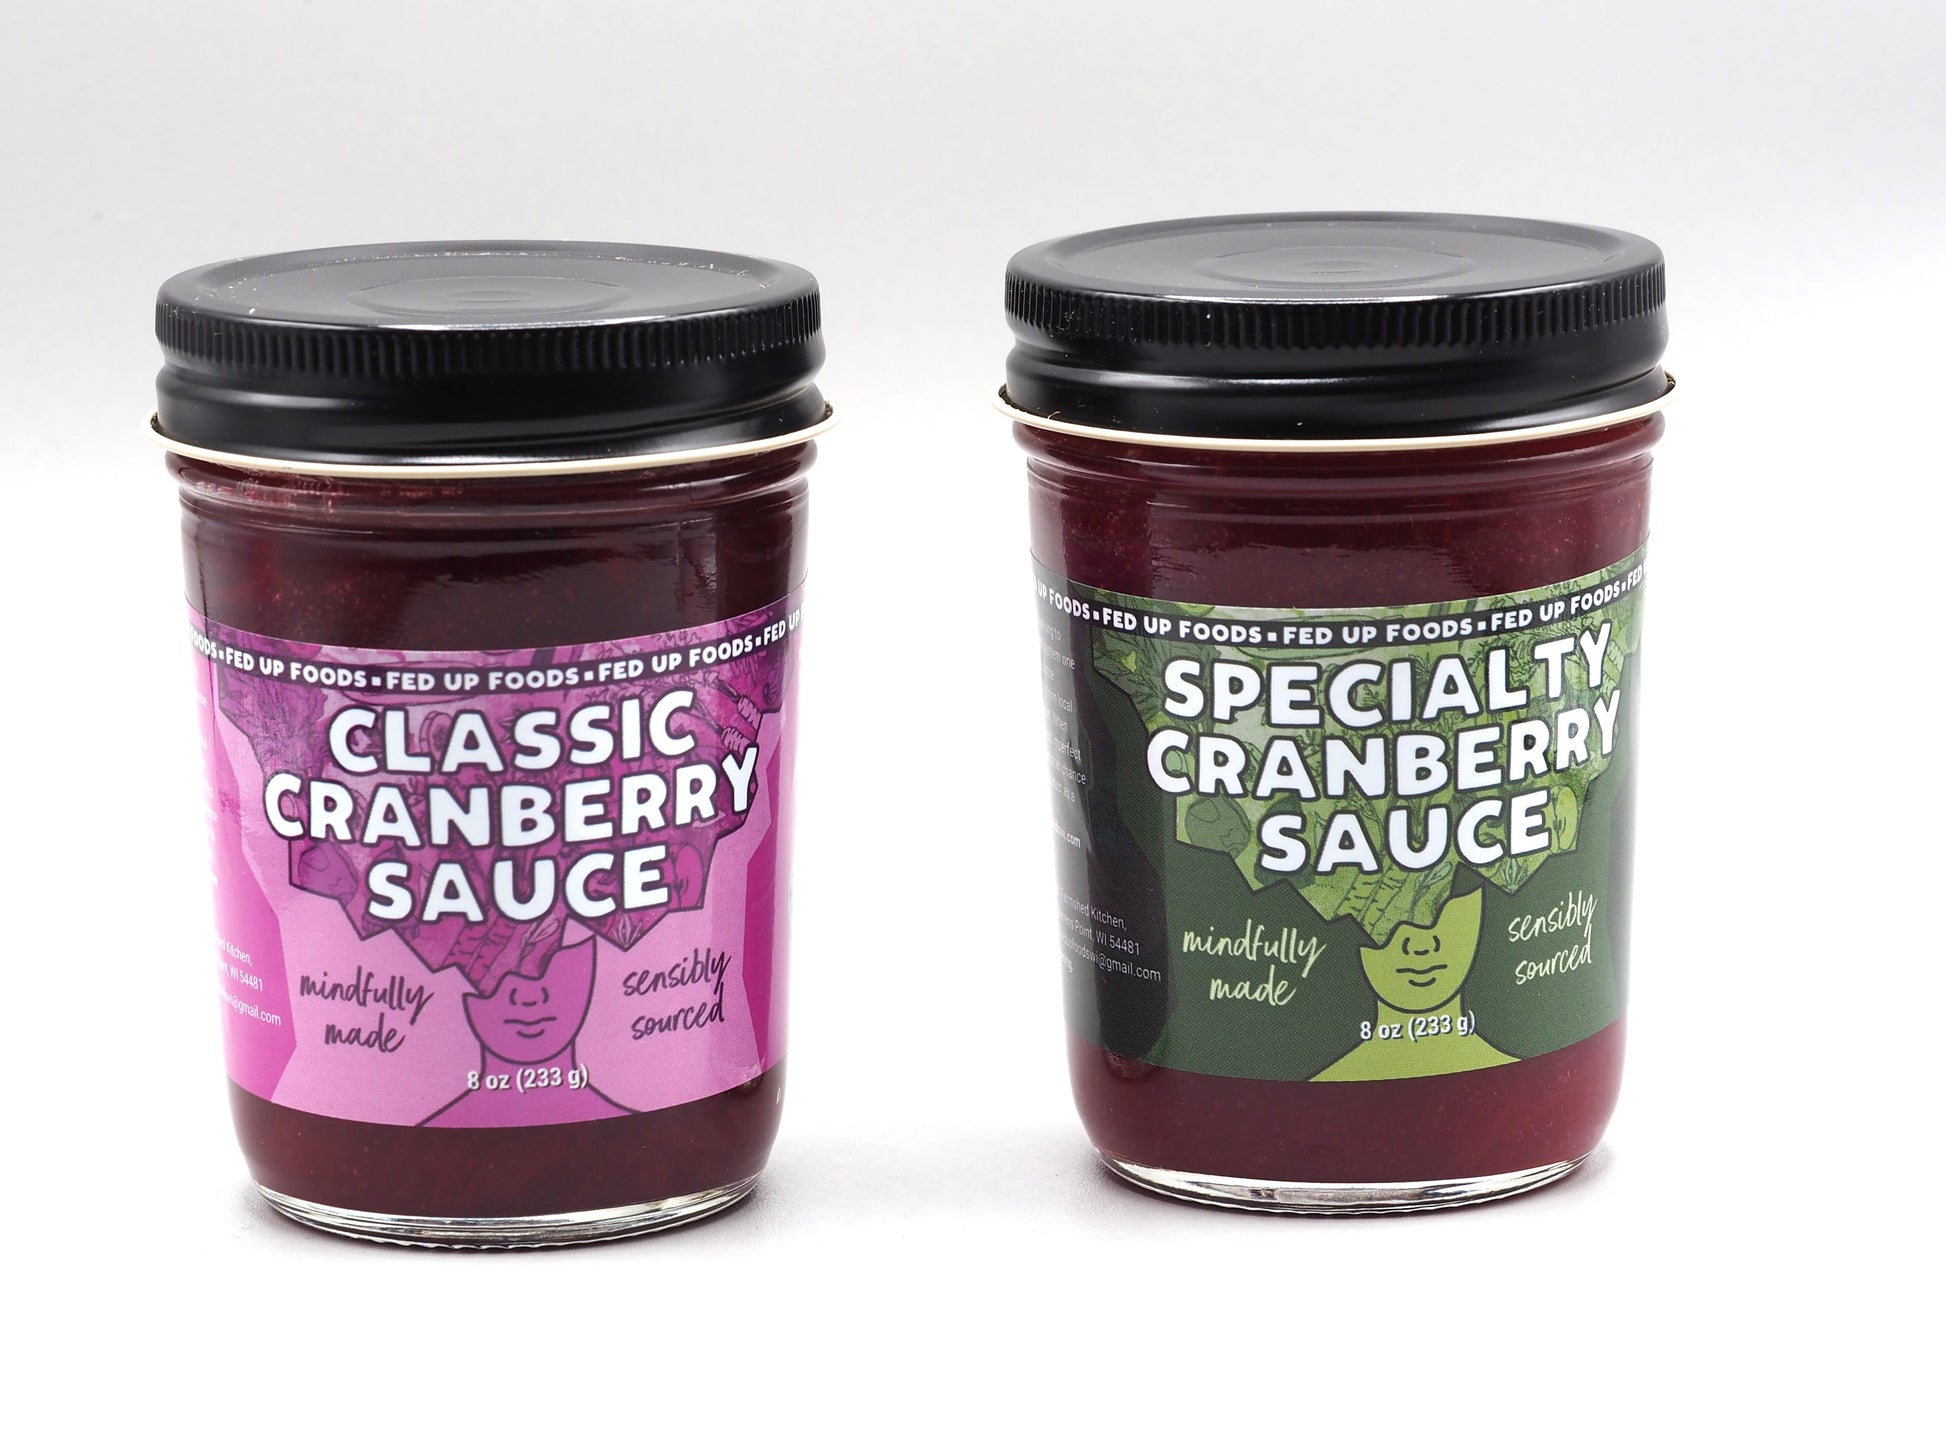 Fed Up Foods Cranberry Sauce Sampler Pack, Get one of each Classic Cranberry Sauce and Specialty Cranberry Sauce